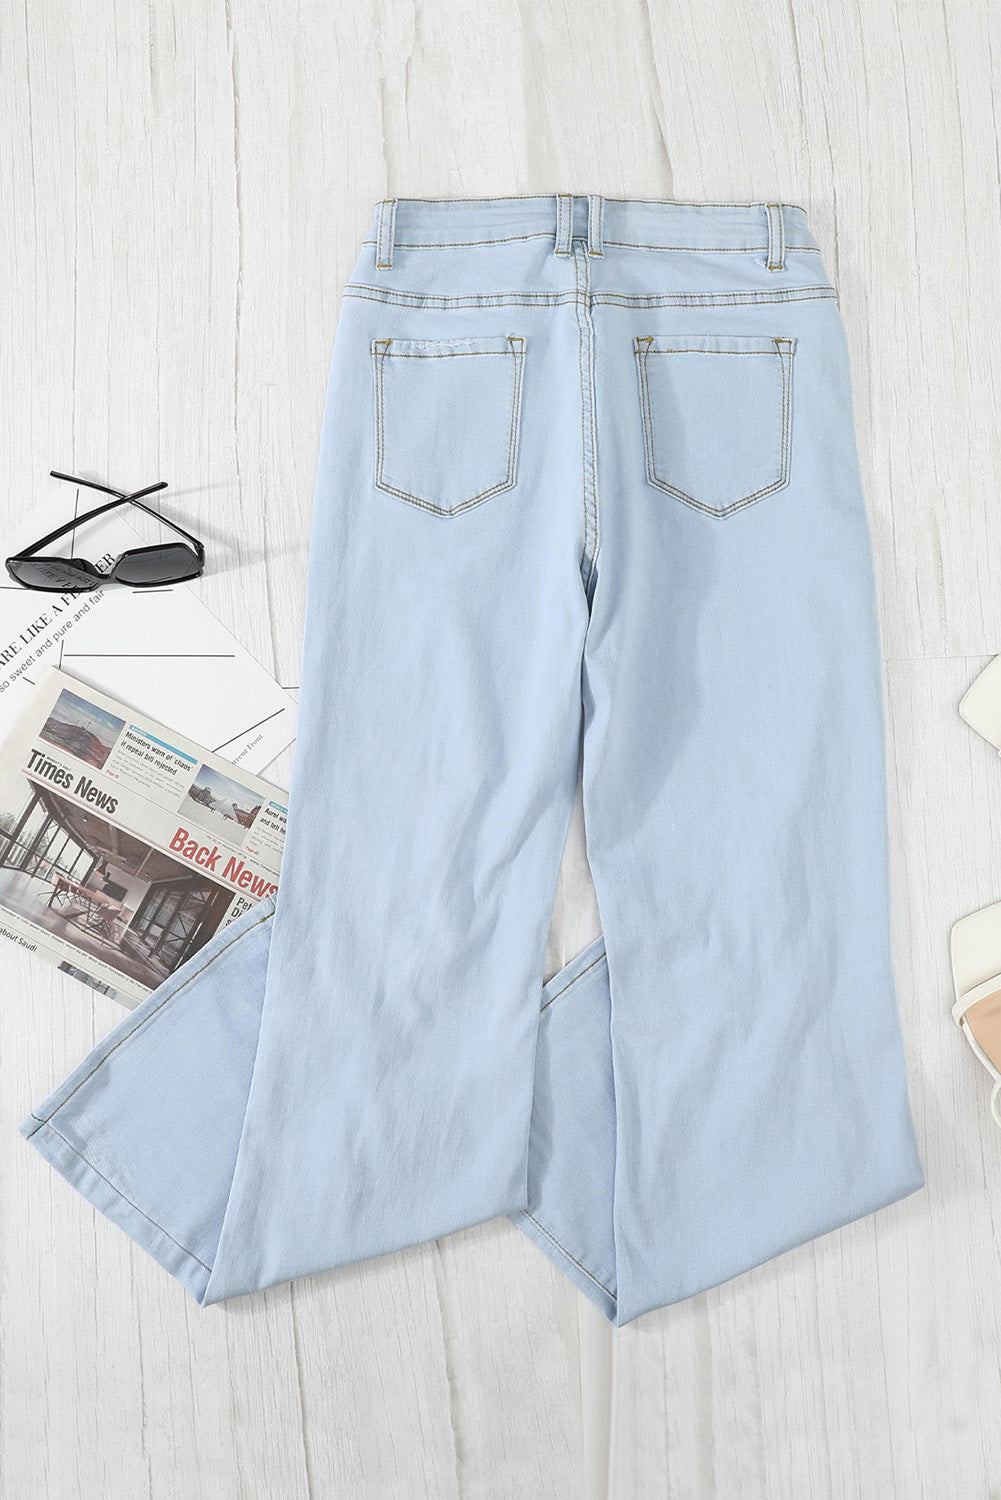 Women's Fashion Sky Blue Washed Ripped Knee Wide Legs Jeans